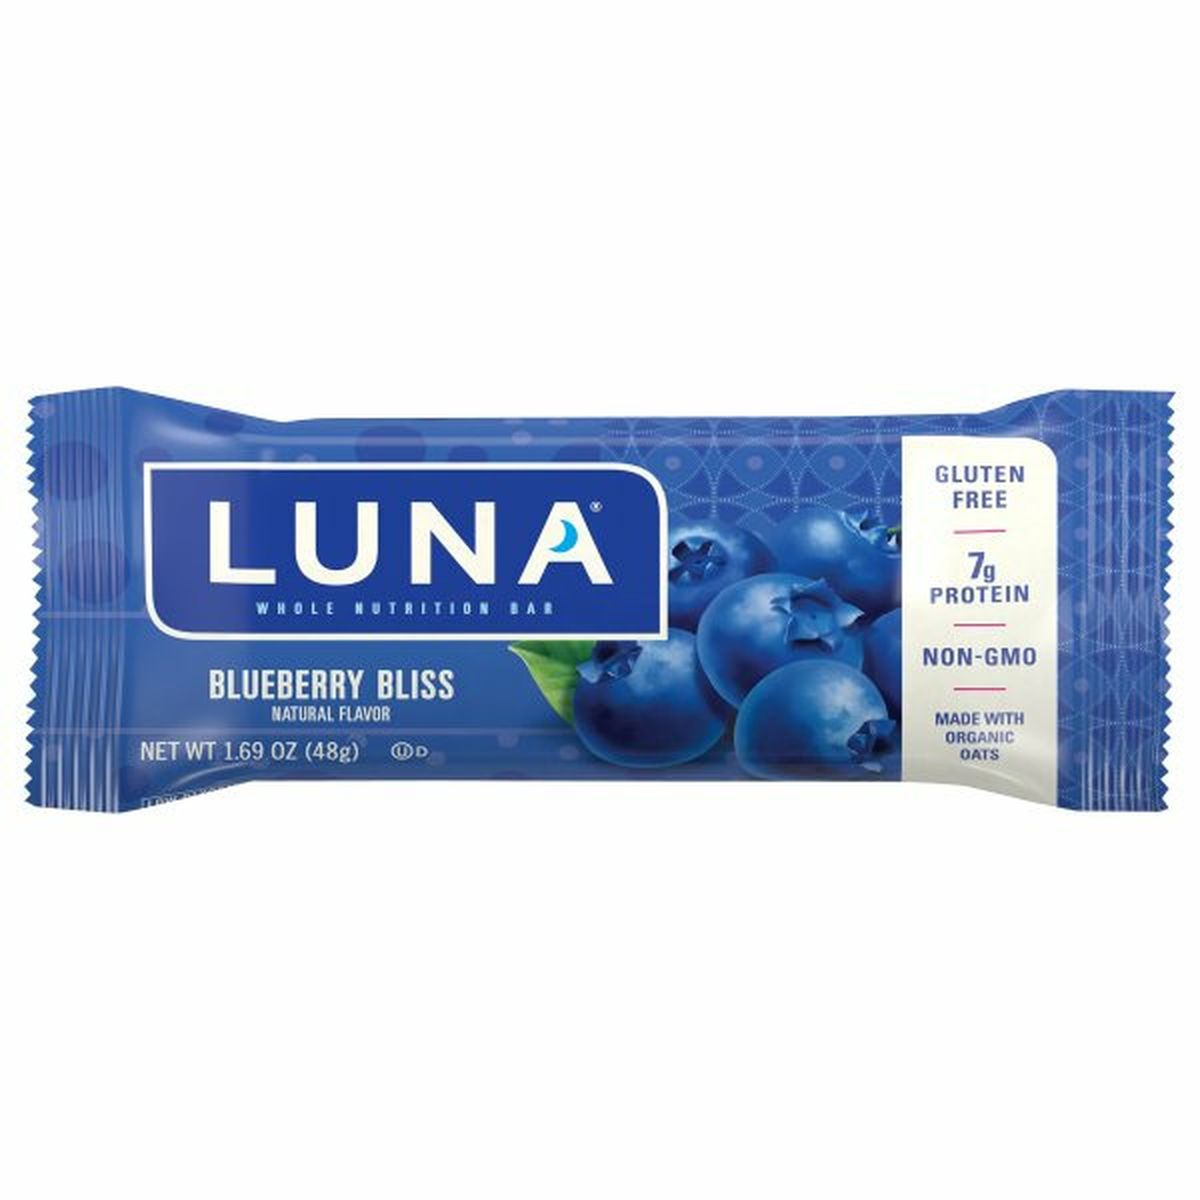 Calories in Luna Whole Nutrition Bar, Blueberry Bliss